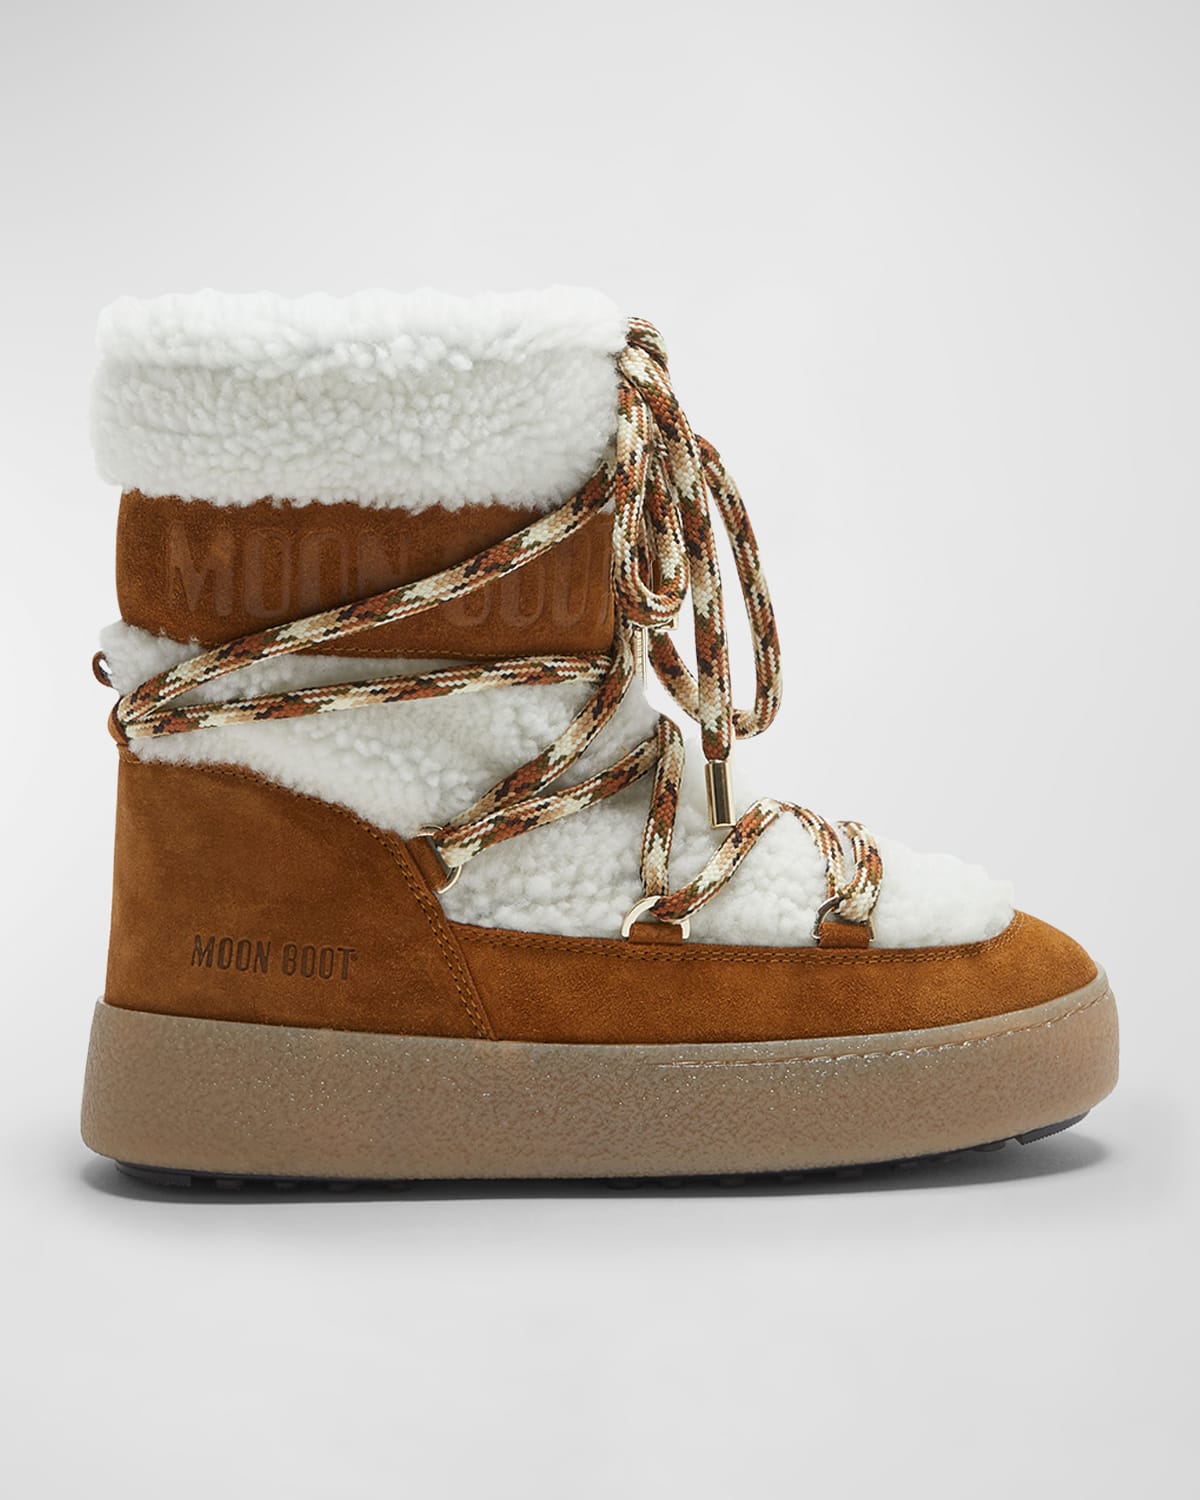 MOON BOOT TRACK SUEDE SHEARLING LACE-UP SNOW BOOTS